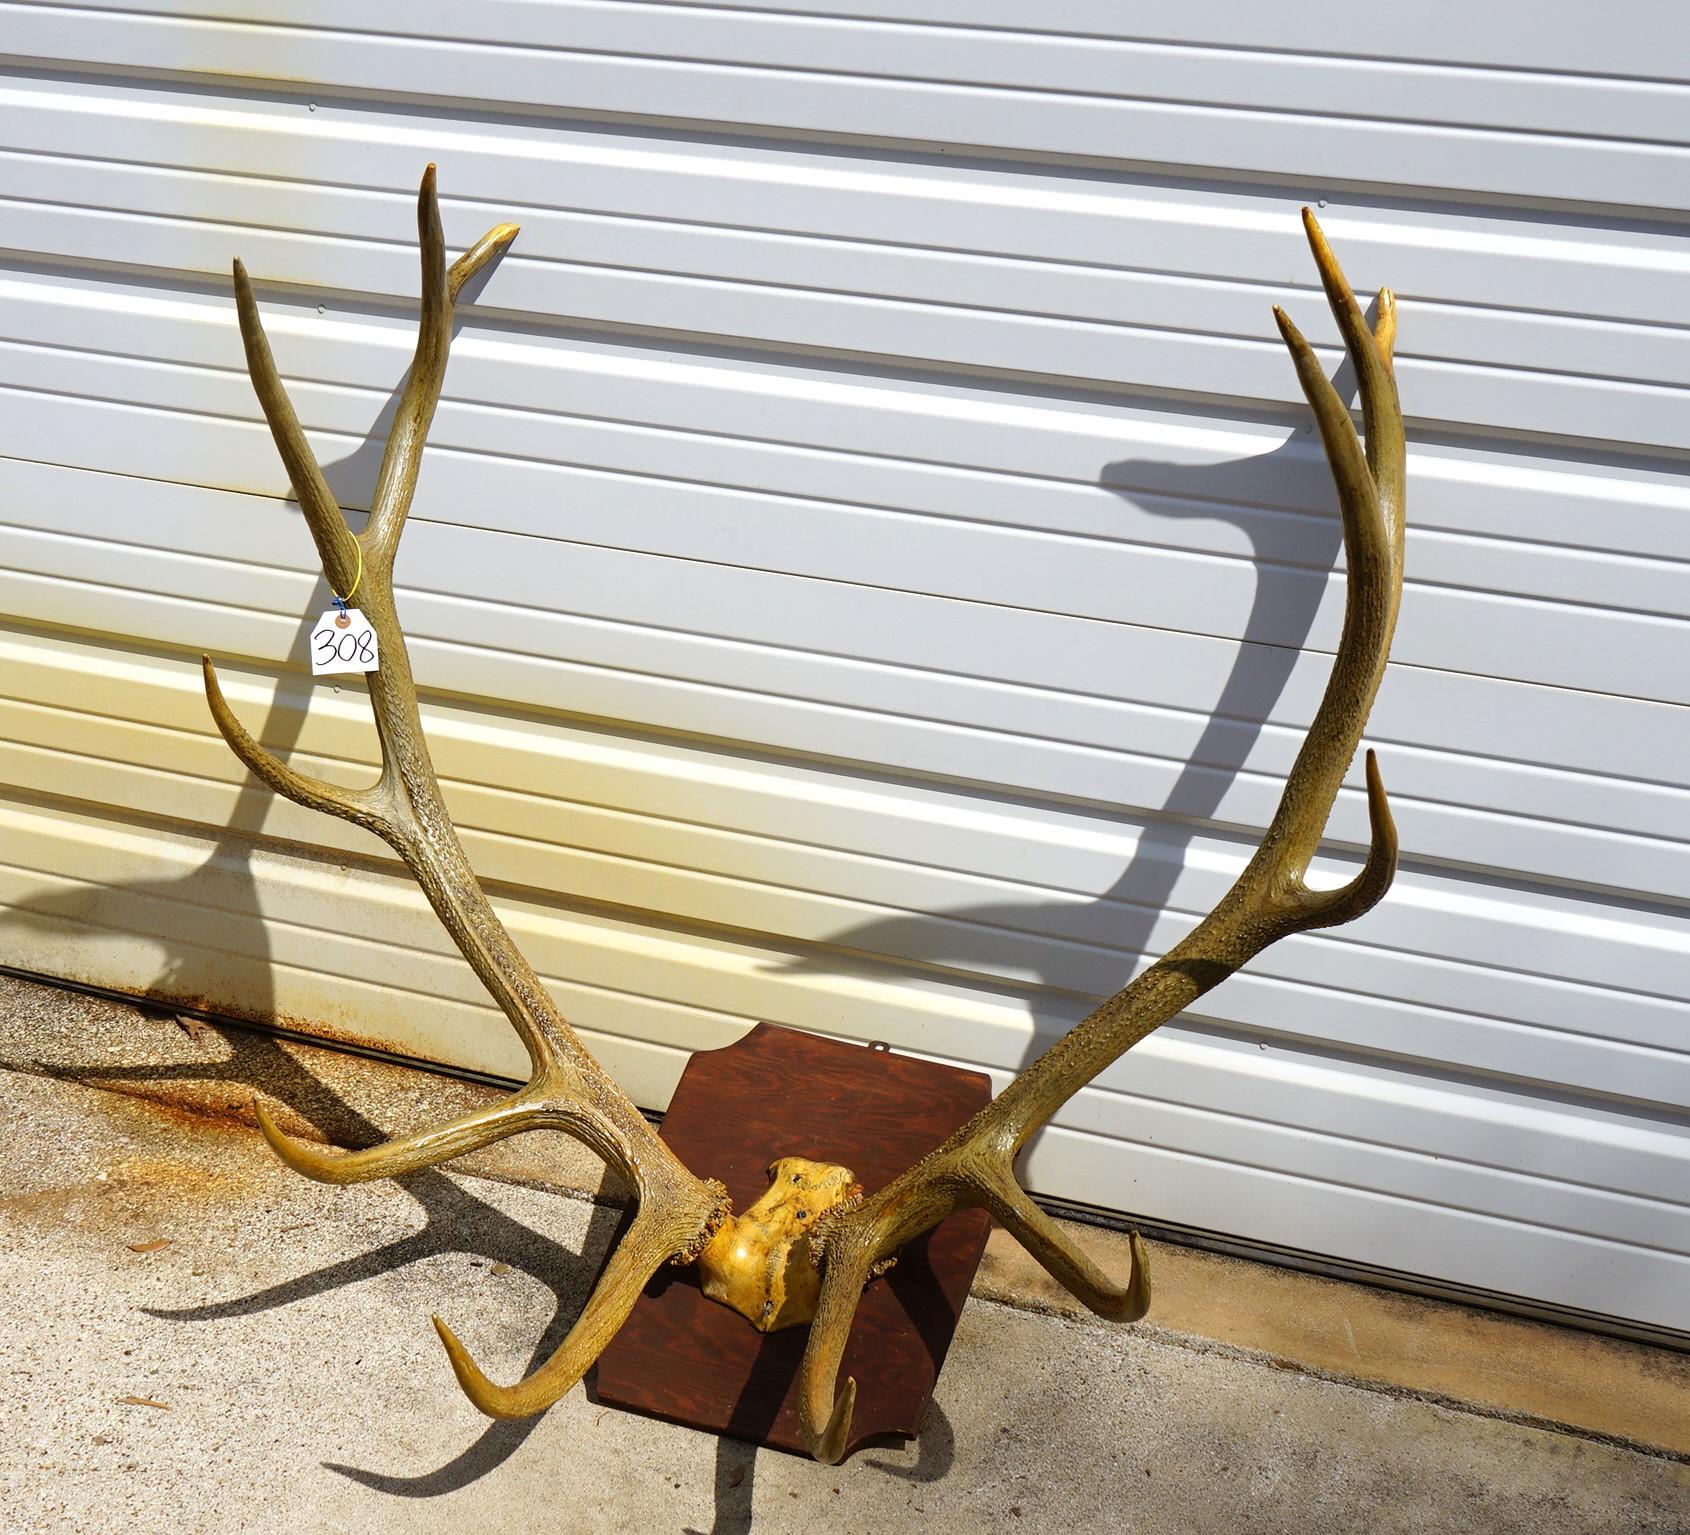 6 x 6 Elk Antlers on Plaque Taxidermy Mount